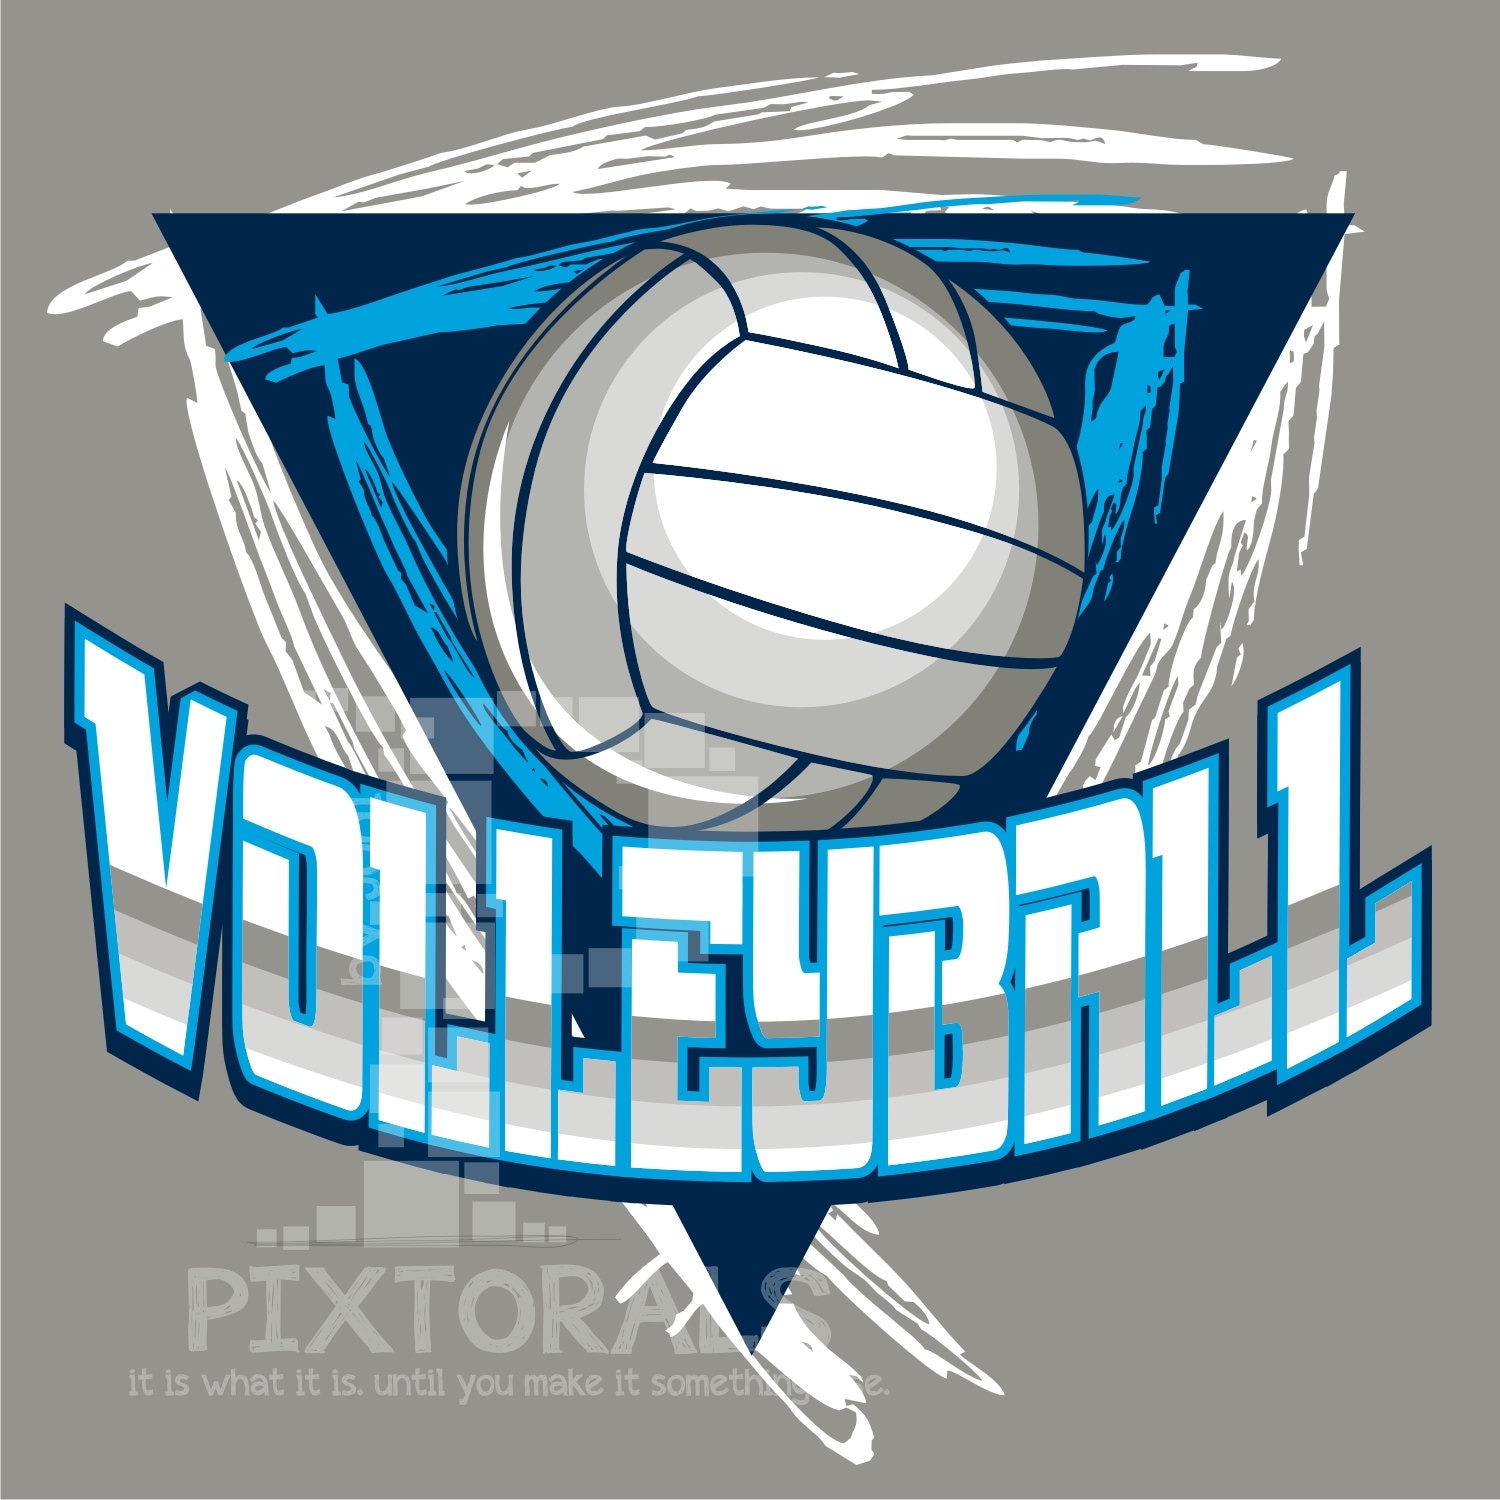 9 Volleyball Top Selling Designs Sports Game Ball Net Trophy Logo BUNDLE  ClipArt SVG – ClipArt SVG